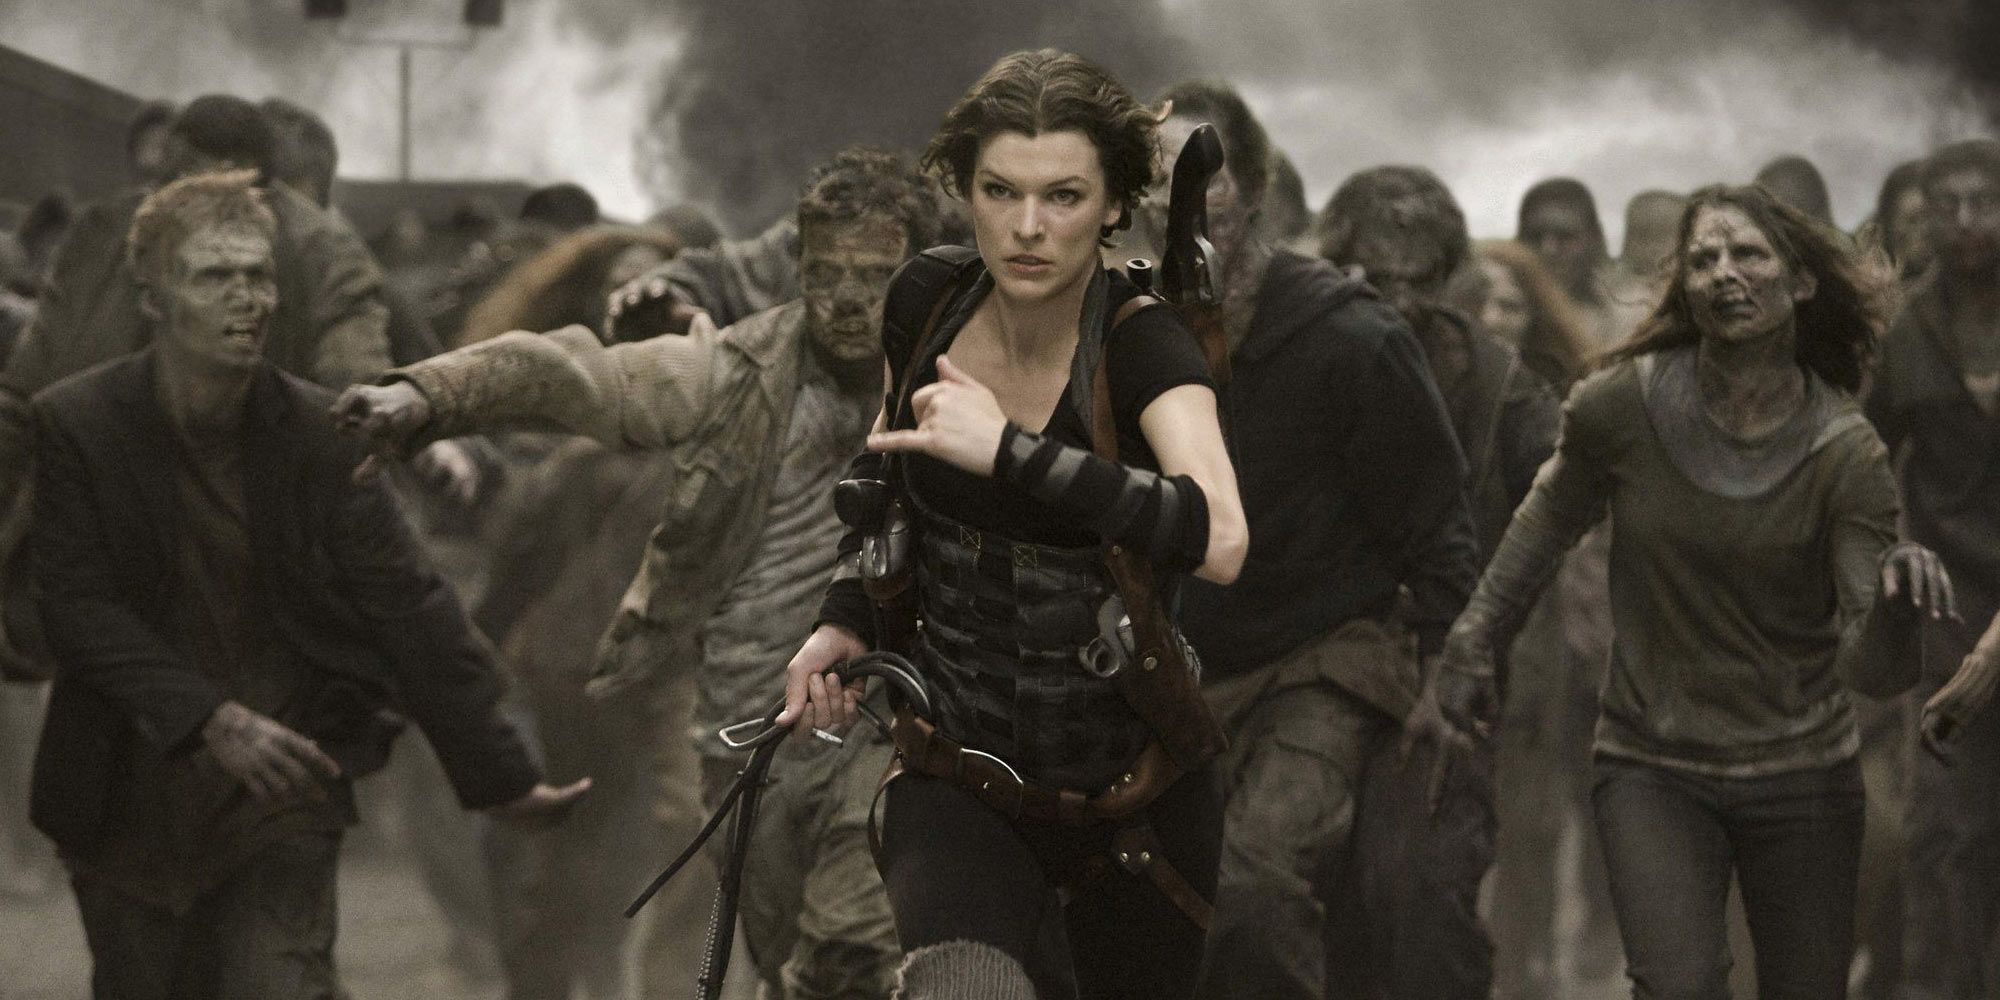 Resident Evil The Final Chapter trailer: Milla Jovovich fights to the finish